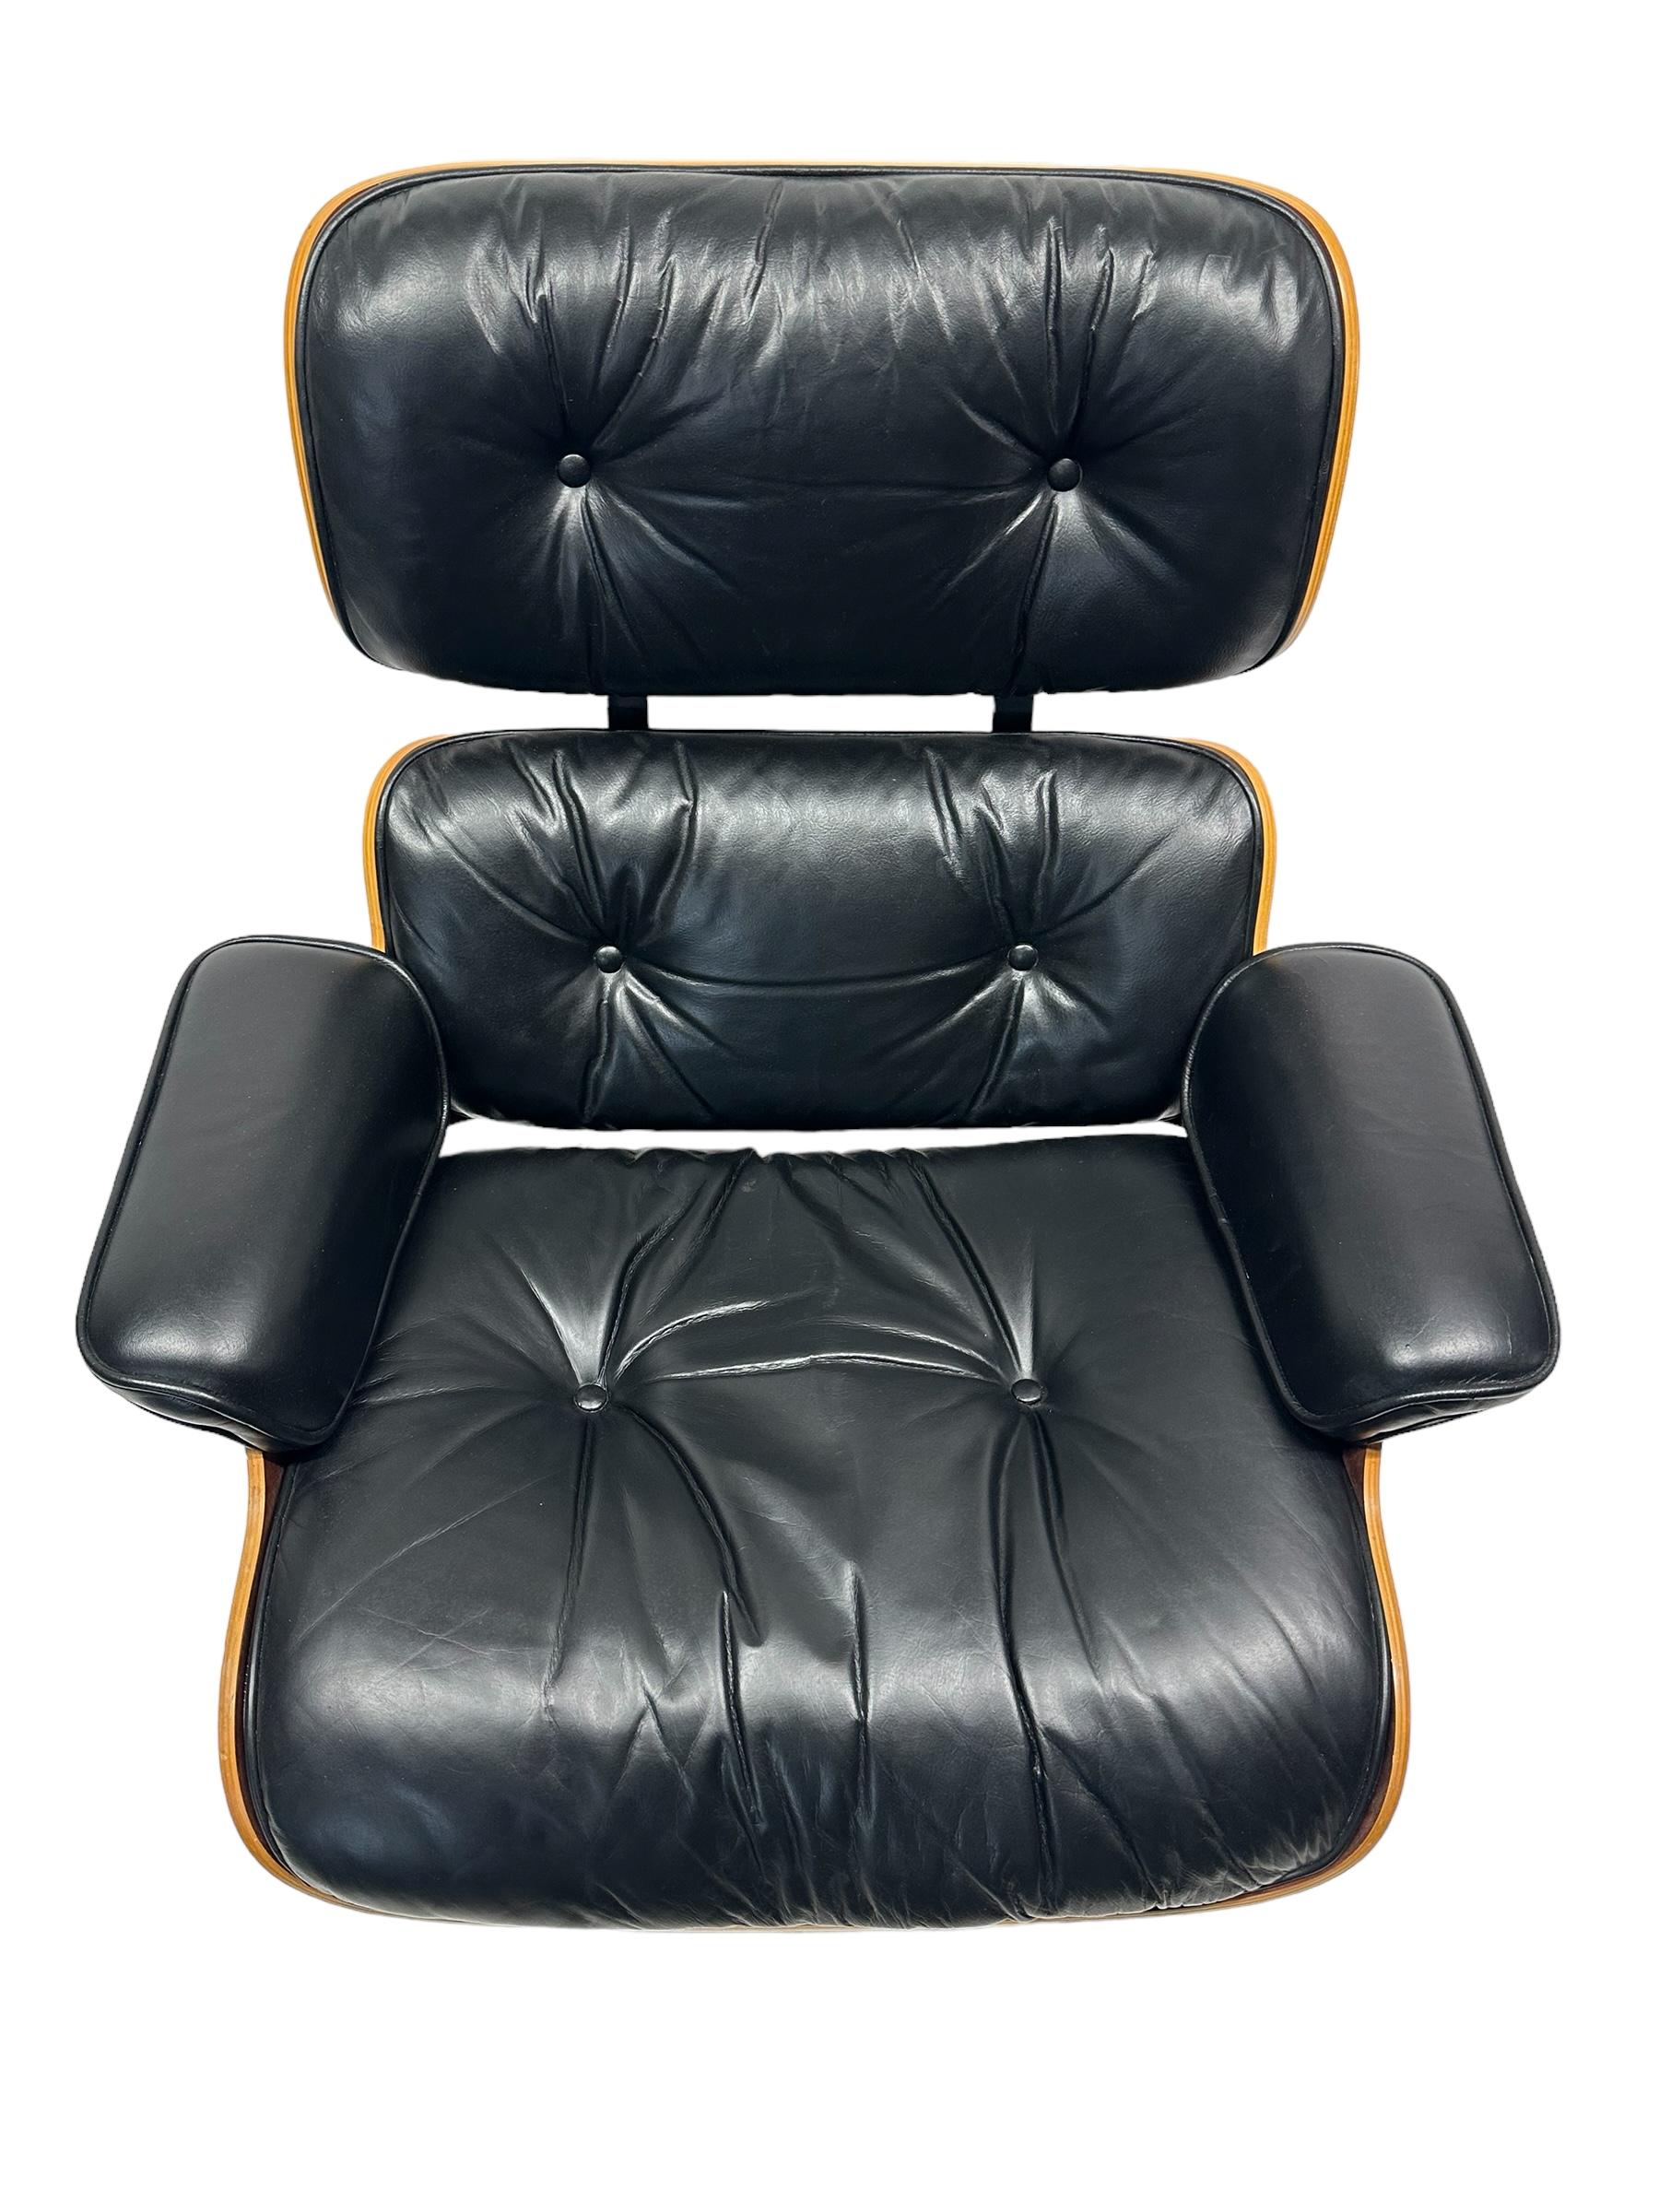 American Eames Lounge Chair and Ottoman  For Sale